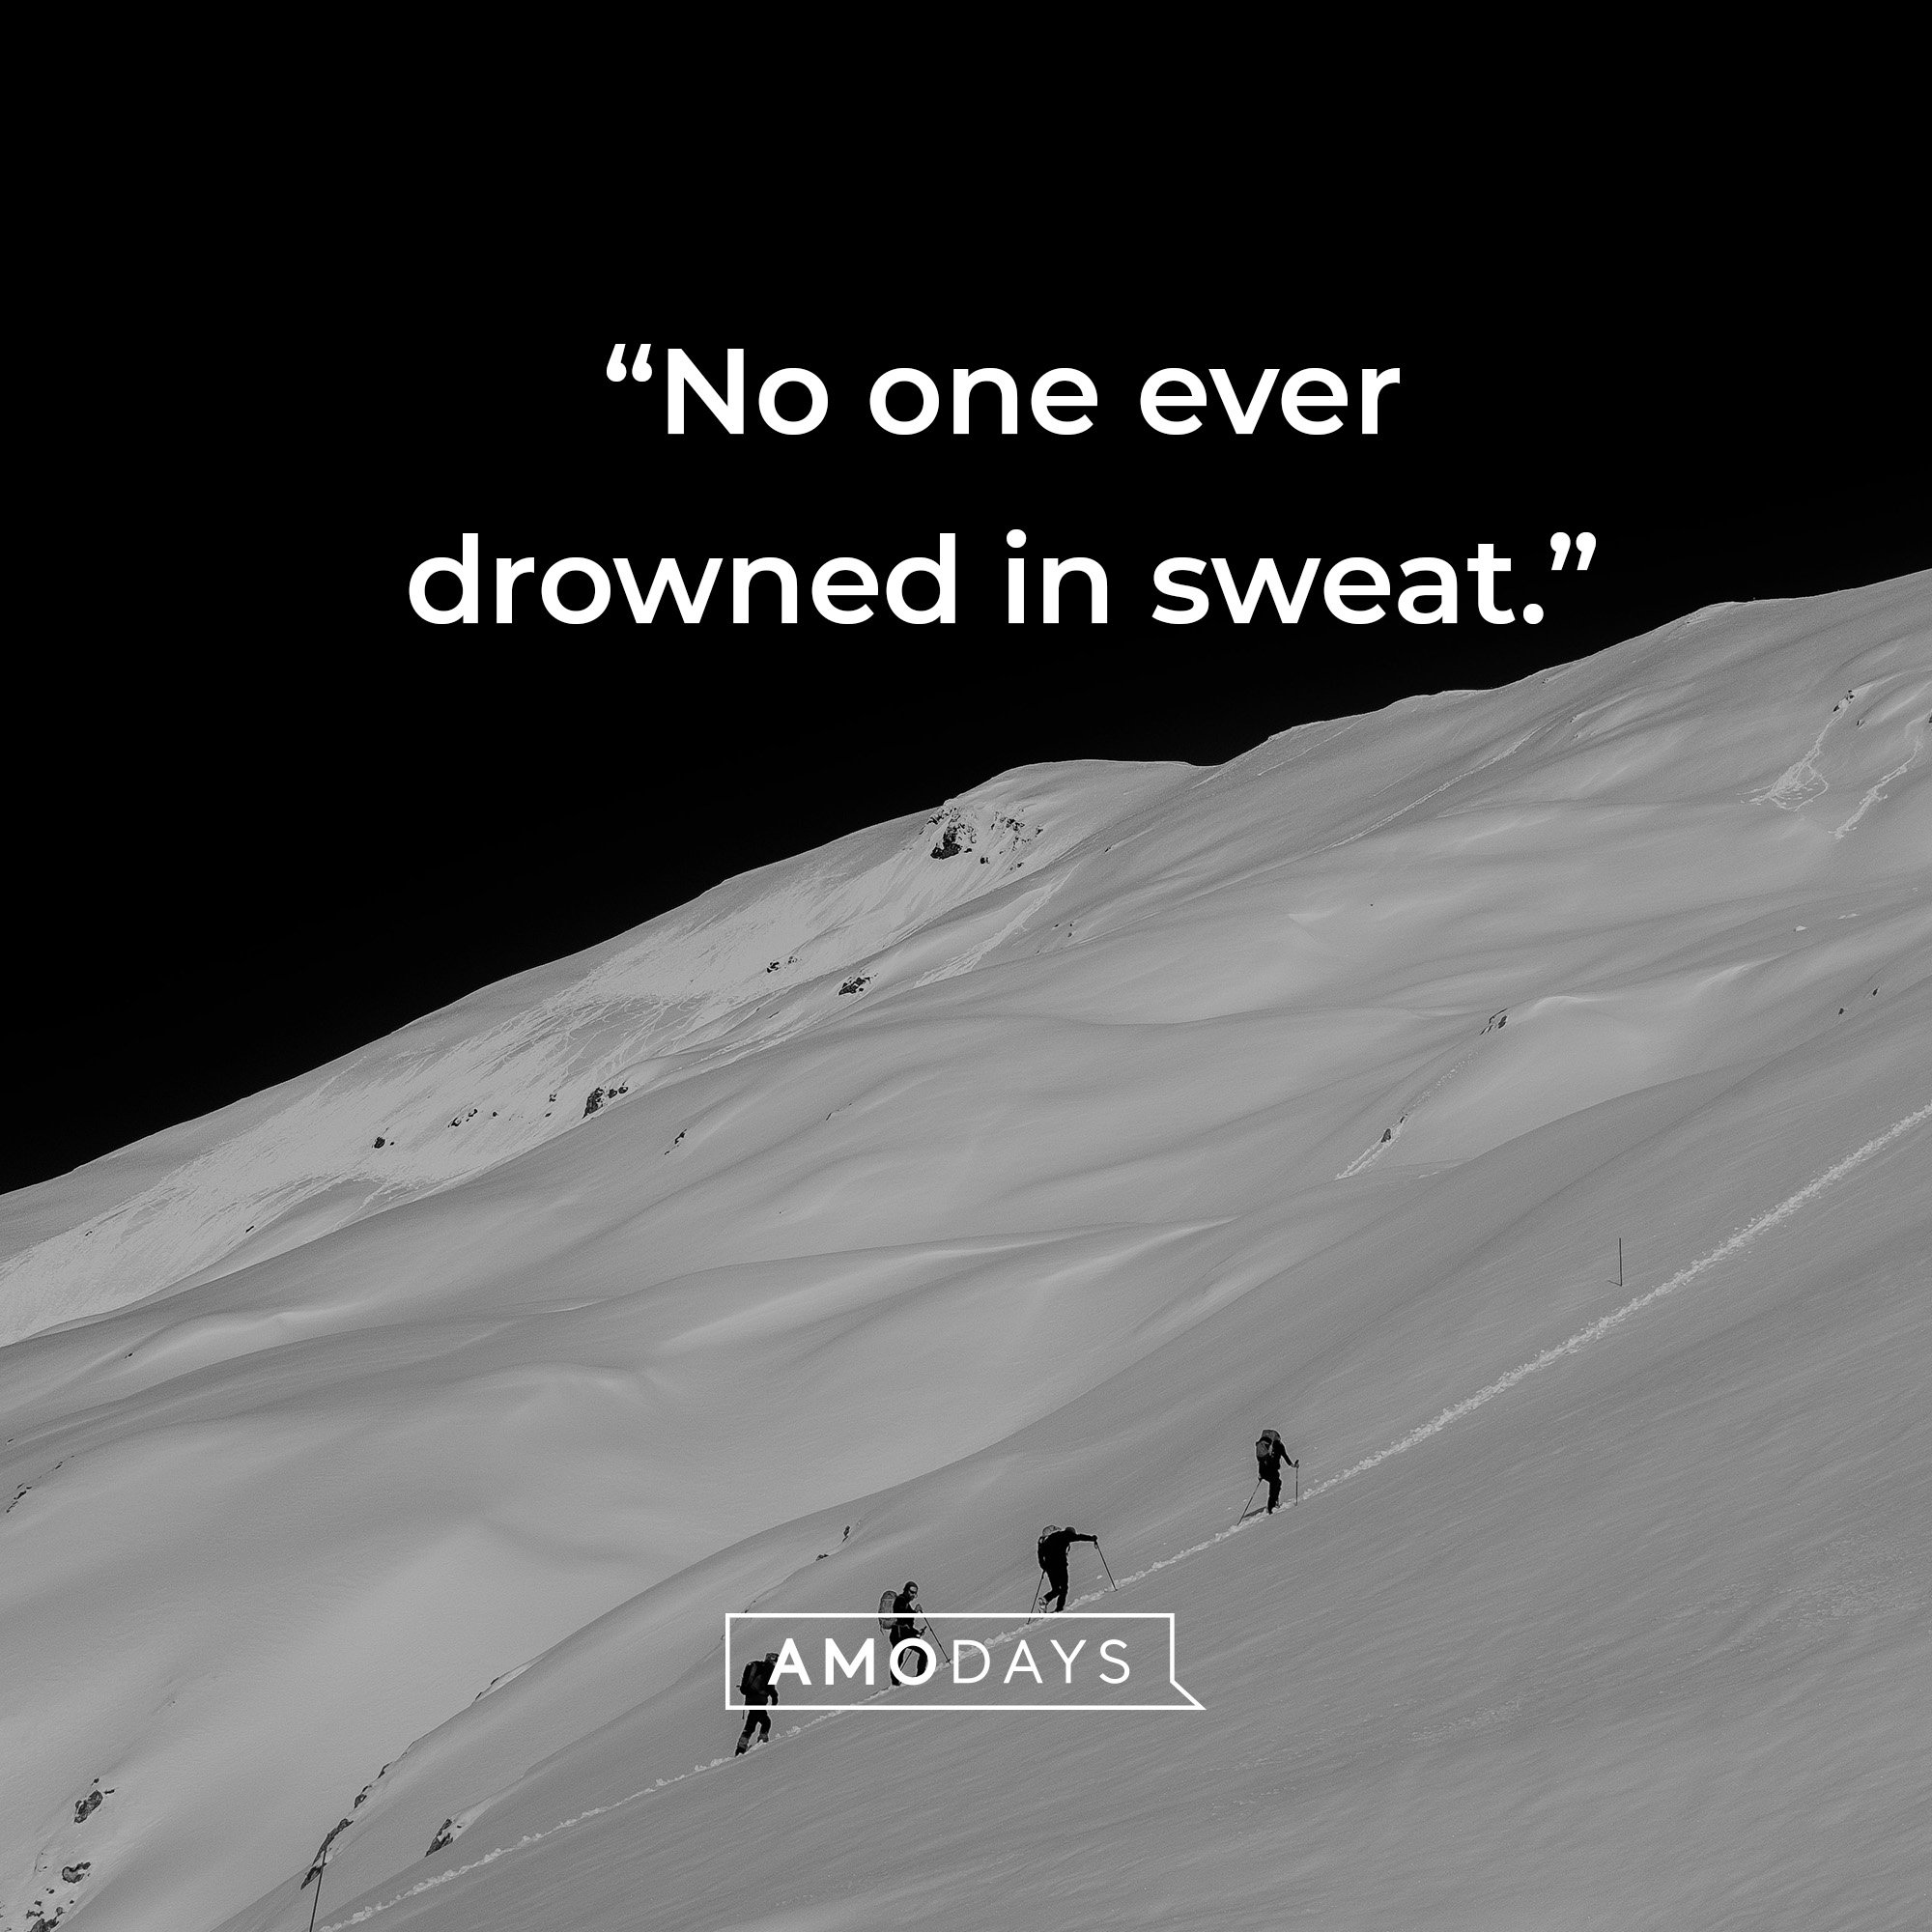 Nike’s quote: "No one ever drowned in sweat.” | Source: AmoDays